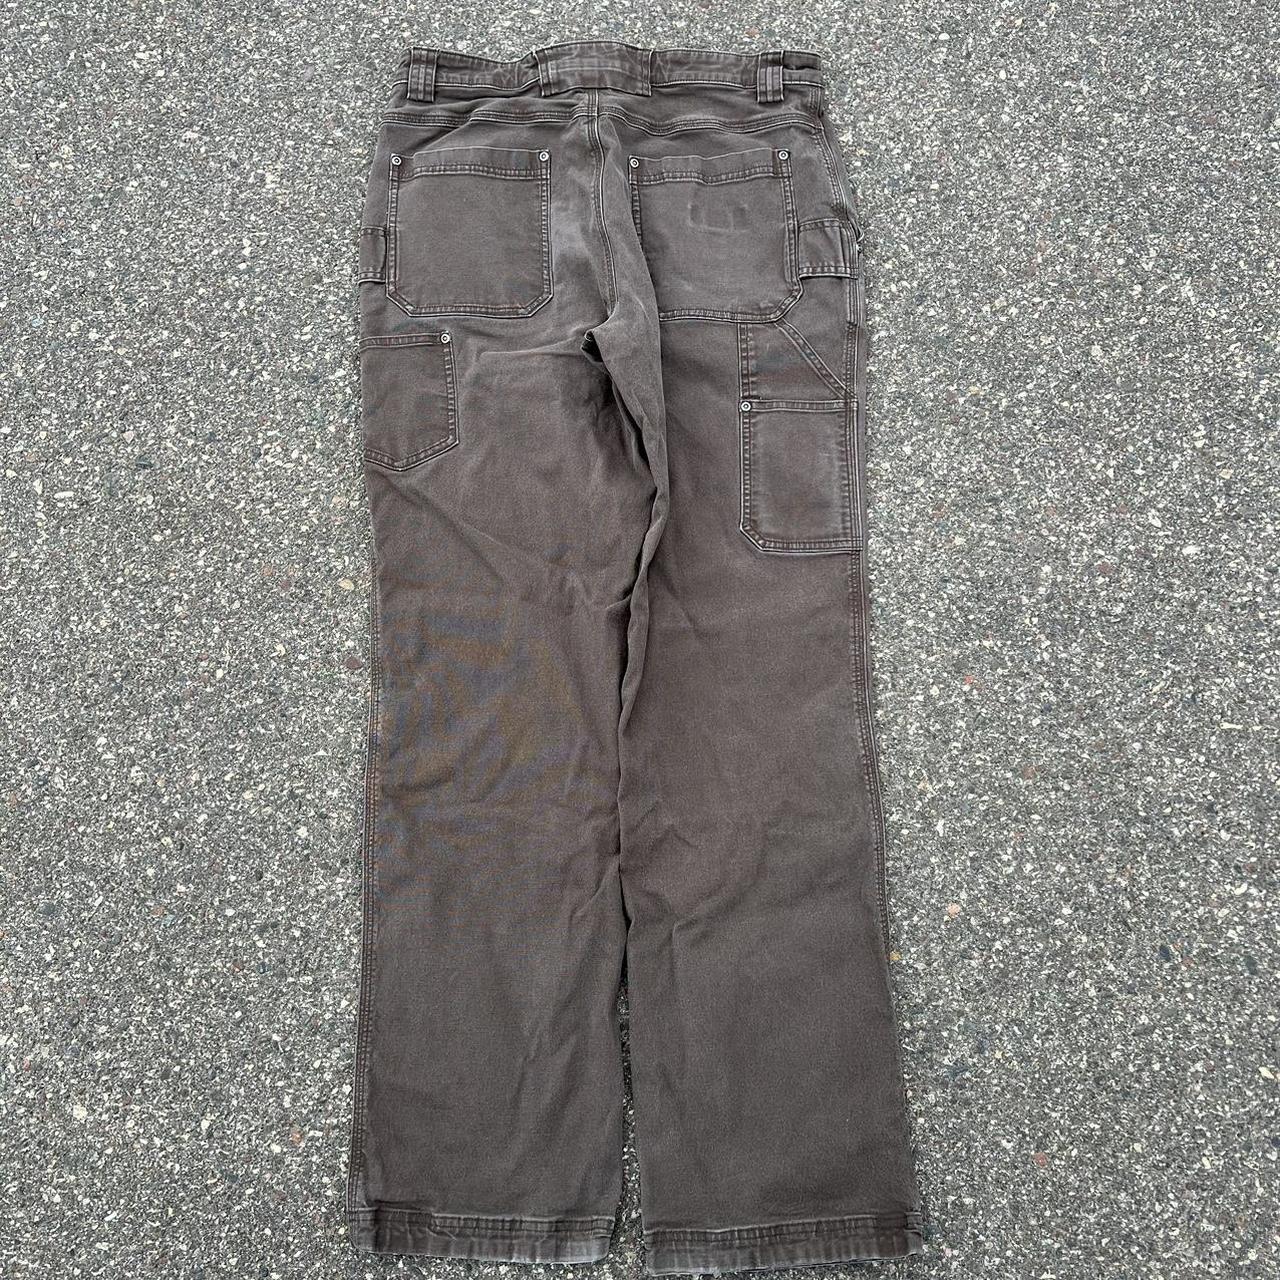 Duluth Trading Company Men's Brown and Black Trousers (2)